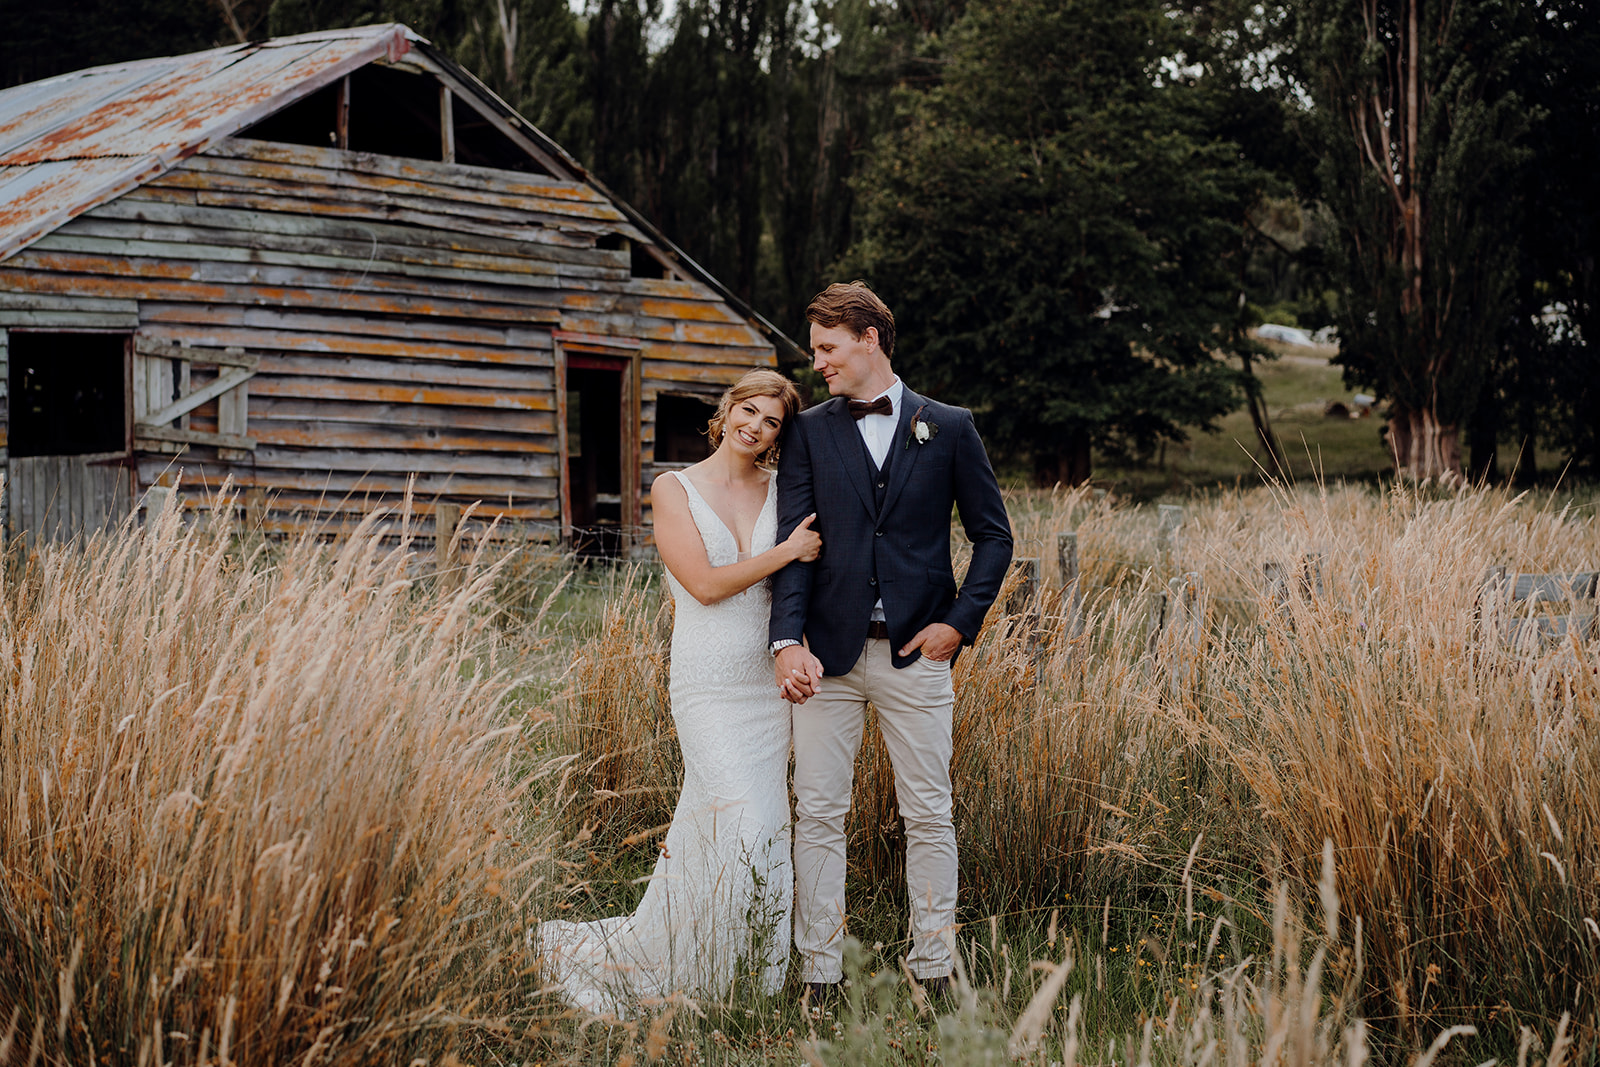 A bride and groom standing in the long grass in front of a rustic shearing shed on a family farm during their wedding photoshoot with waikato photographer haley adele photography